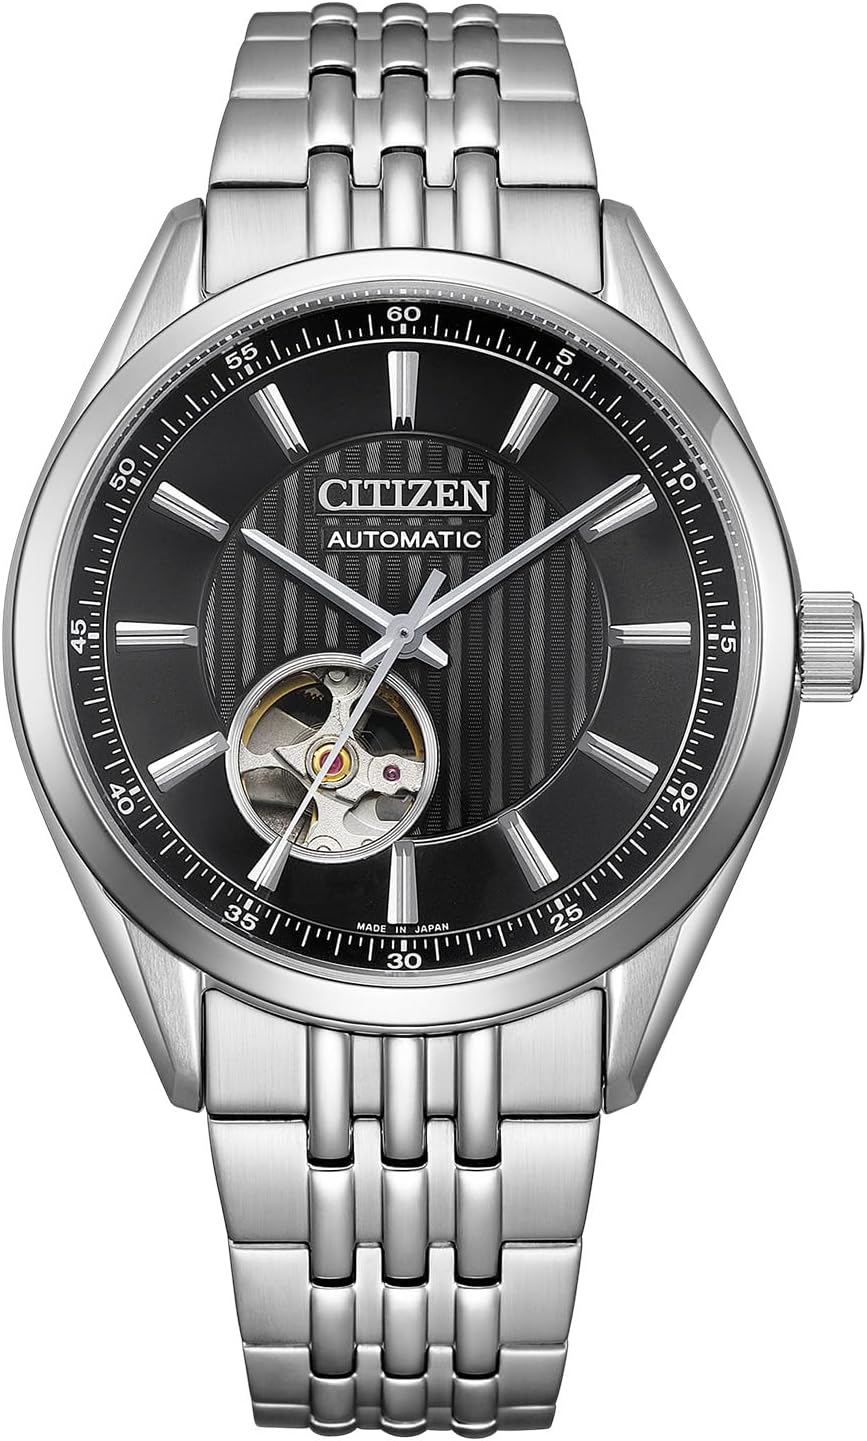 CITIZEN NH9110-90E - Discovery Japan Mall